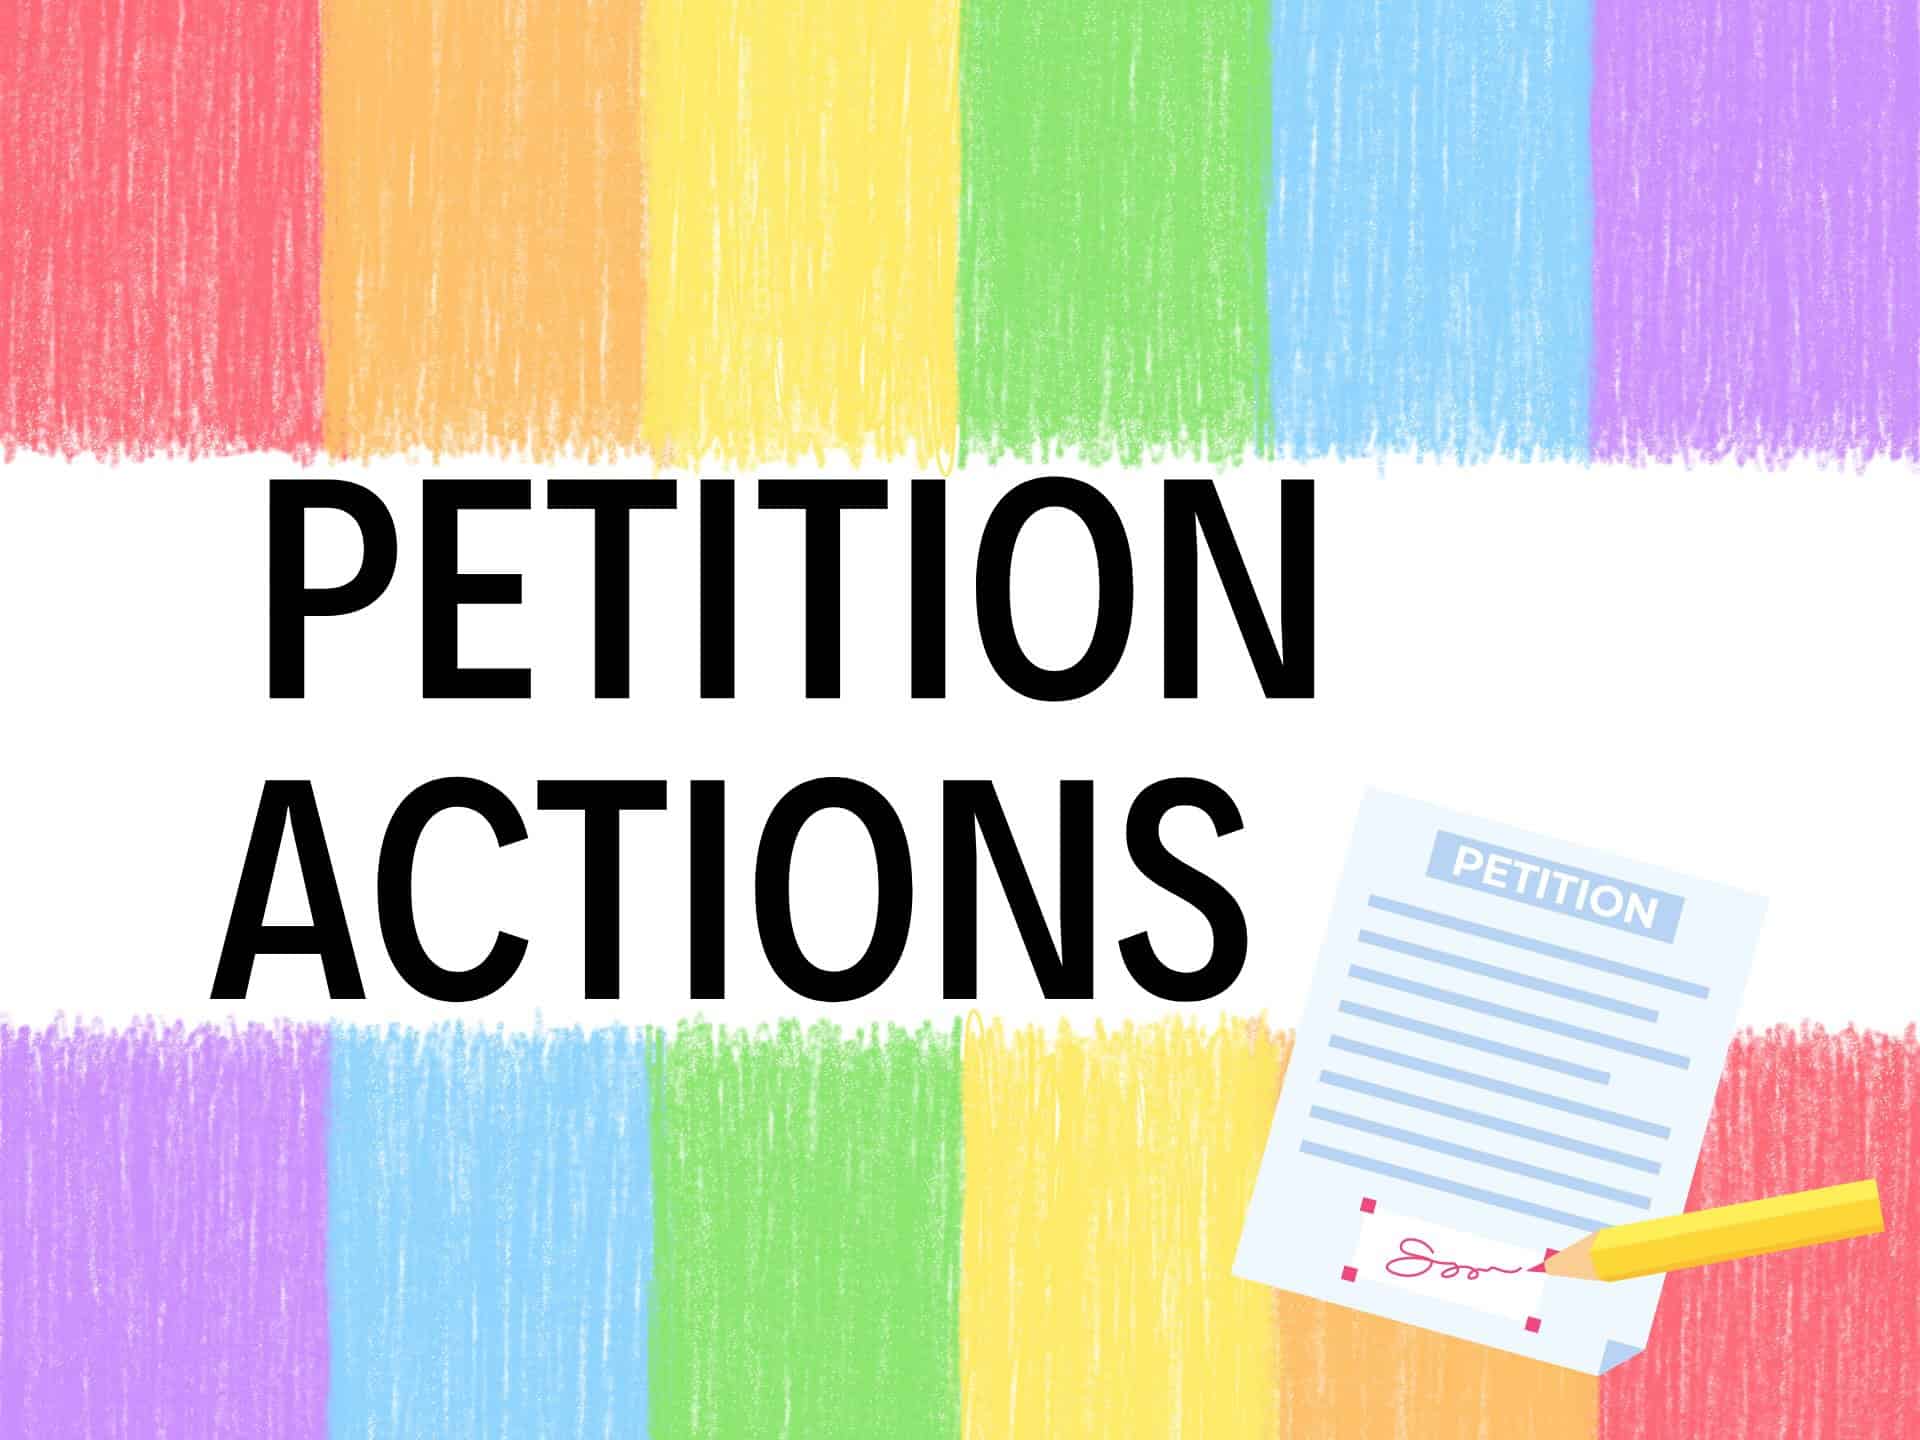 Petition Actions